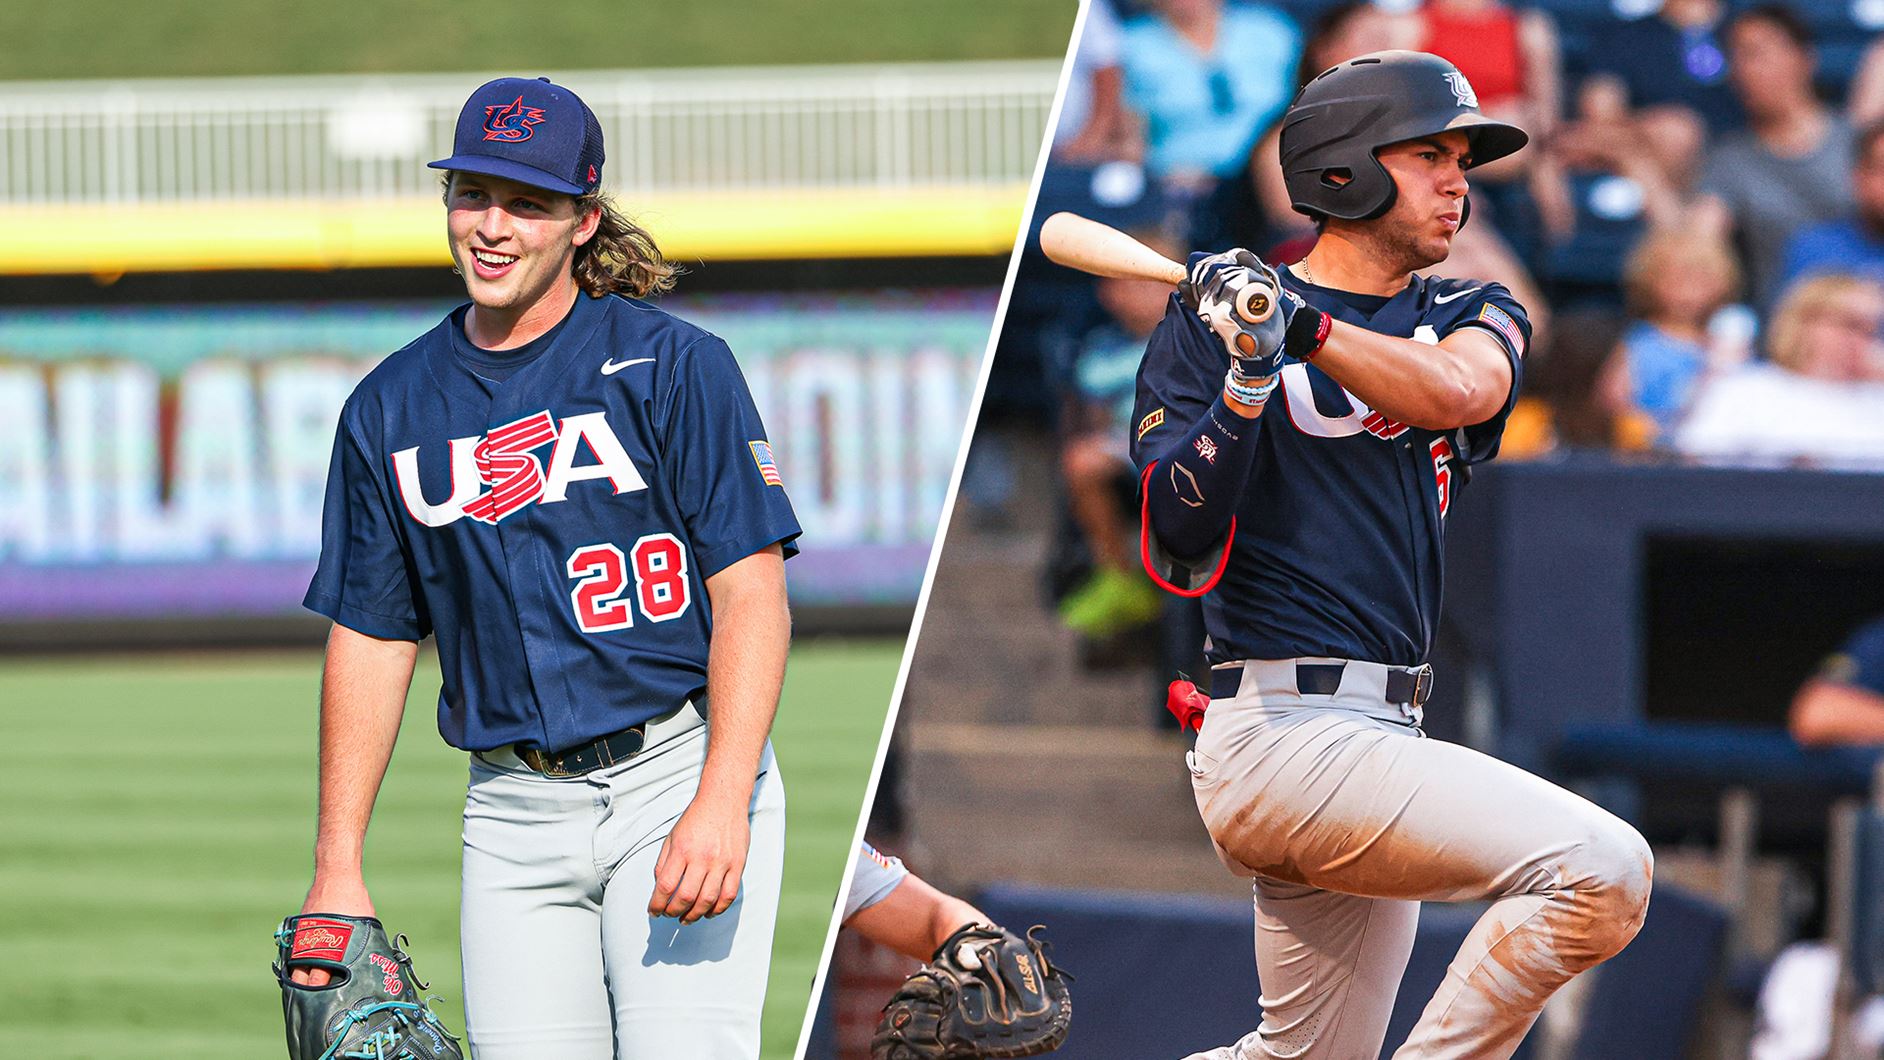 USA Baseball Selects 2019 Collegiate National Team Roster